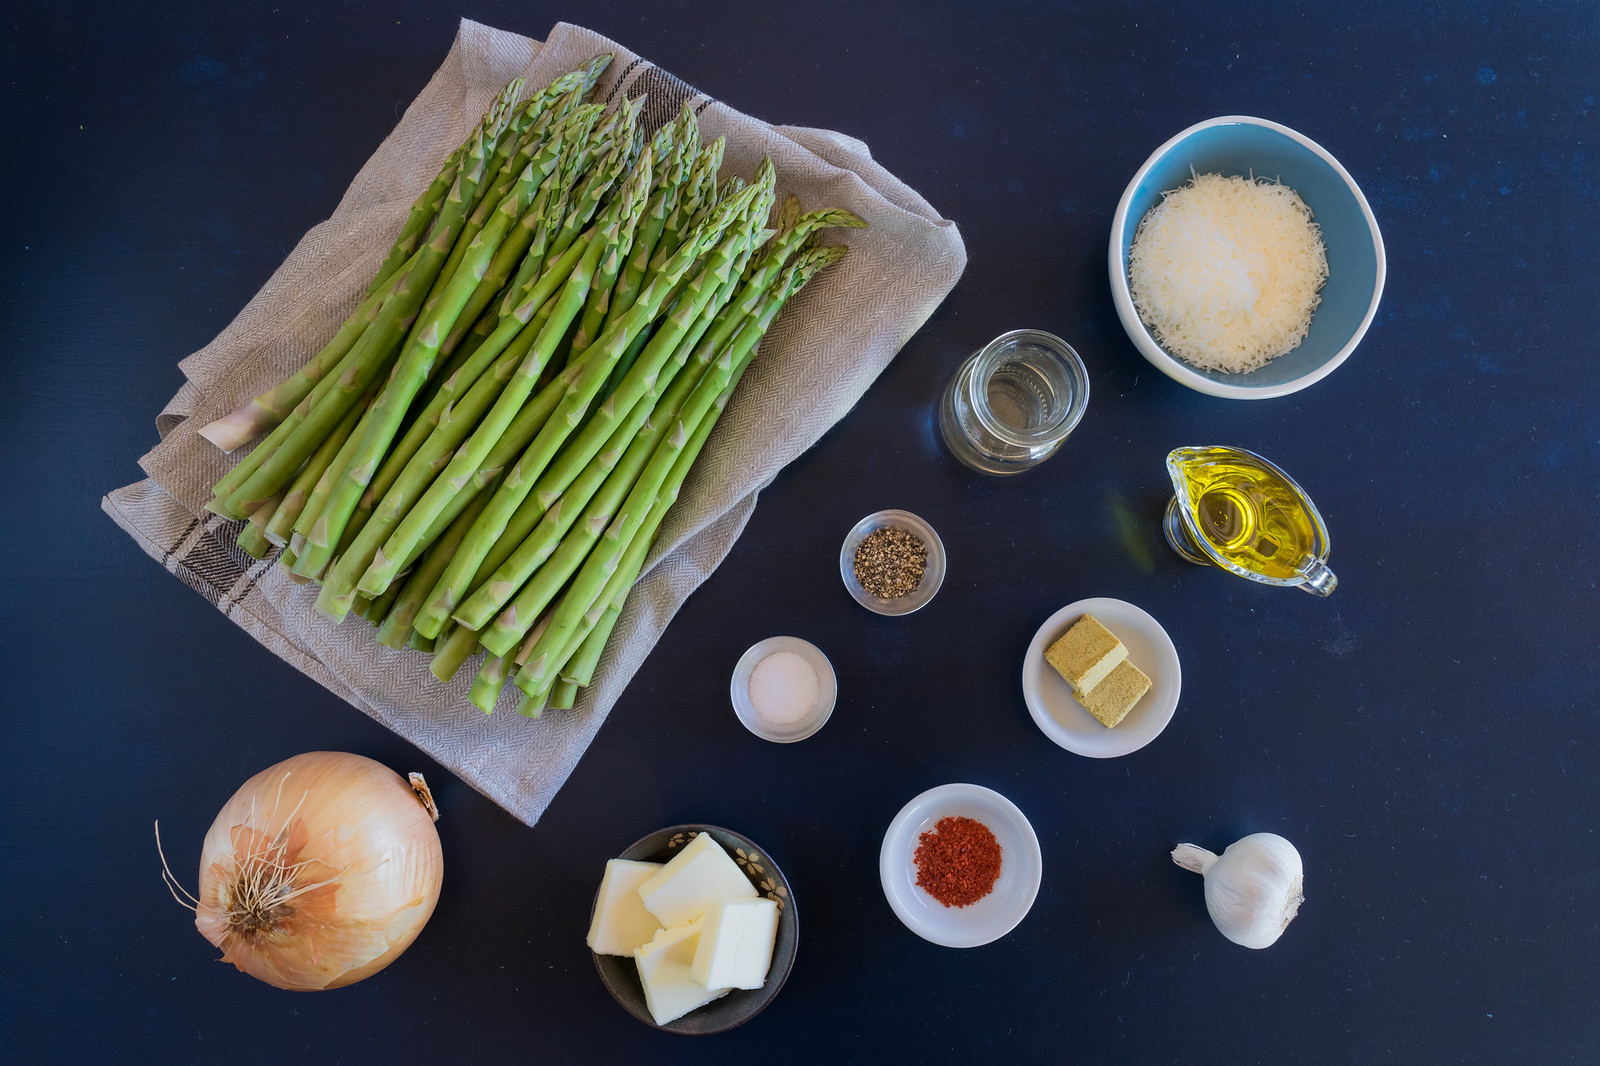 all the ingredients to make asparagus soup